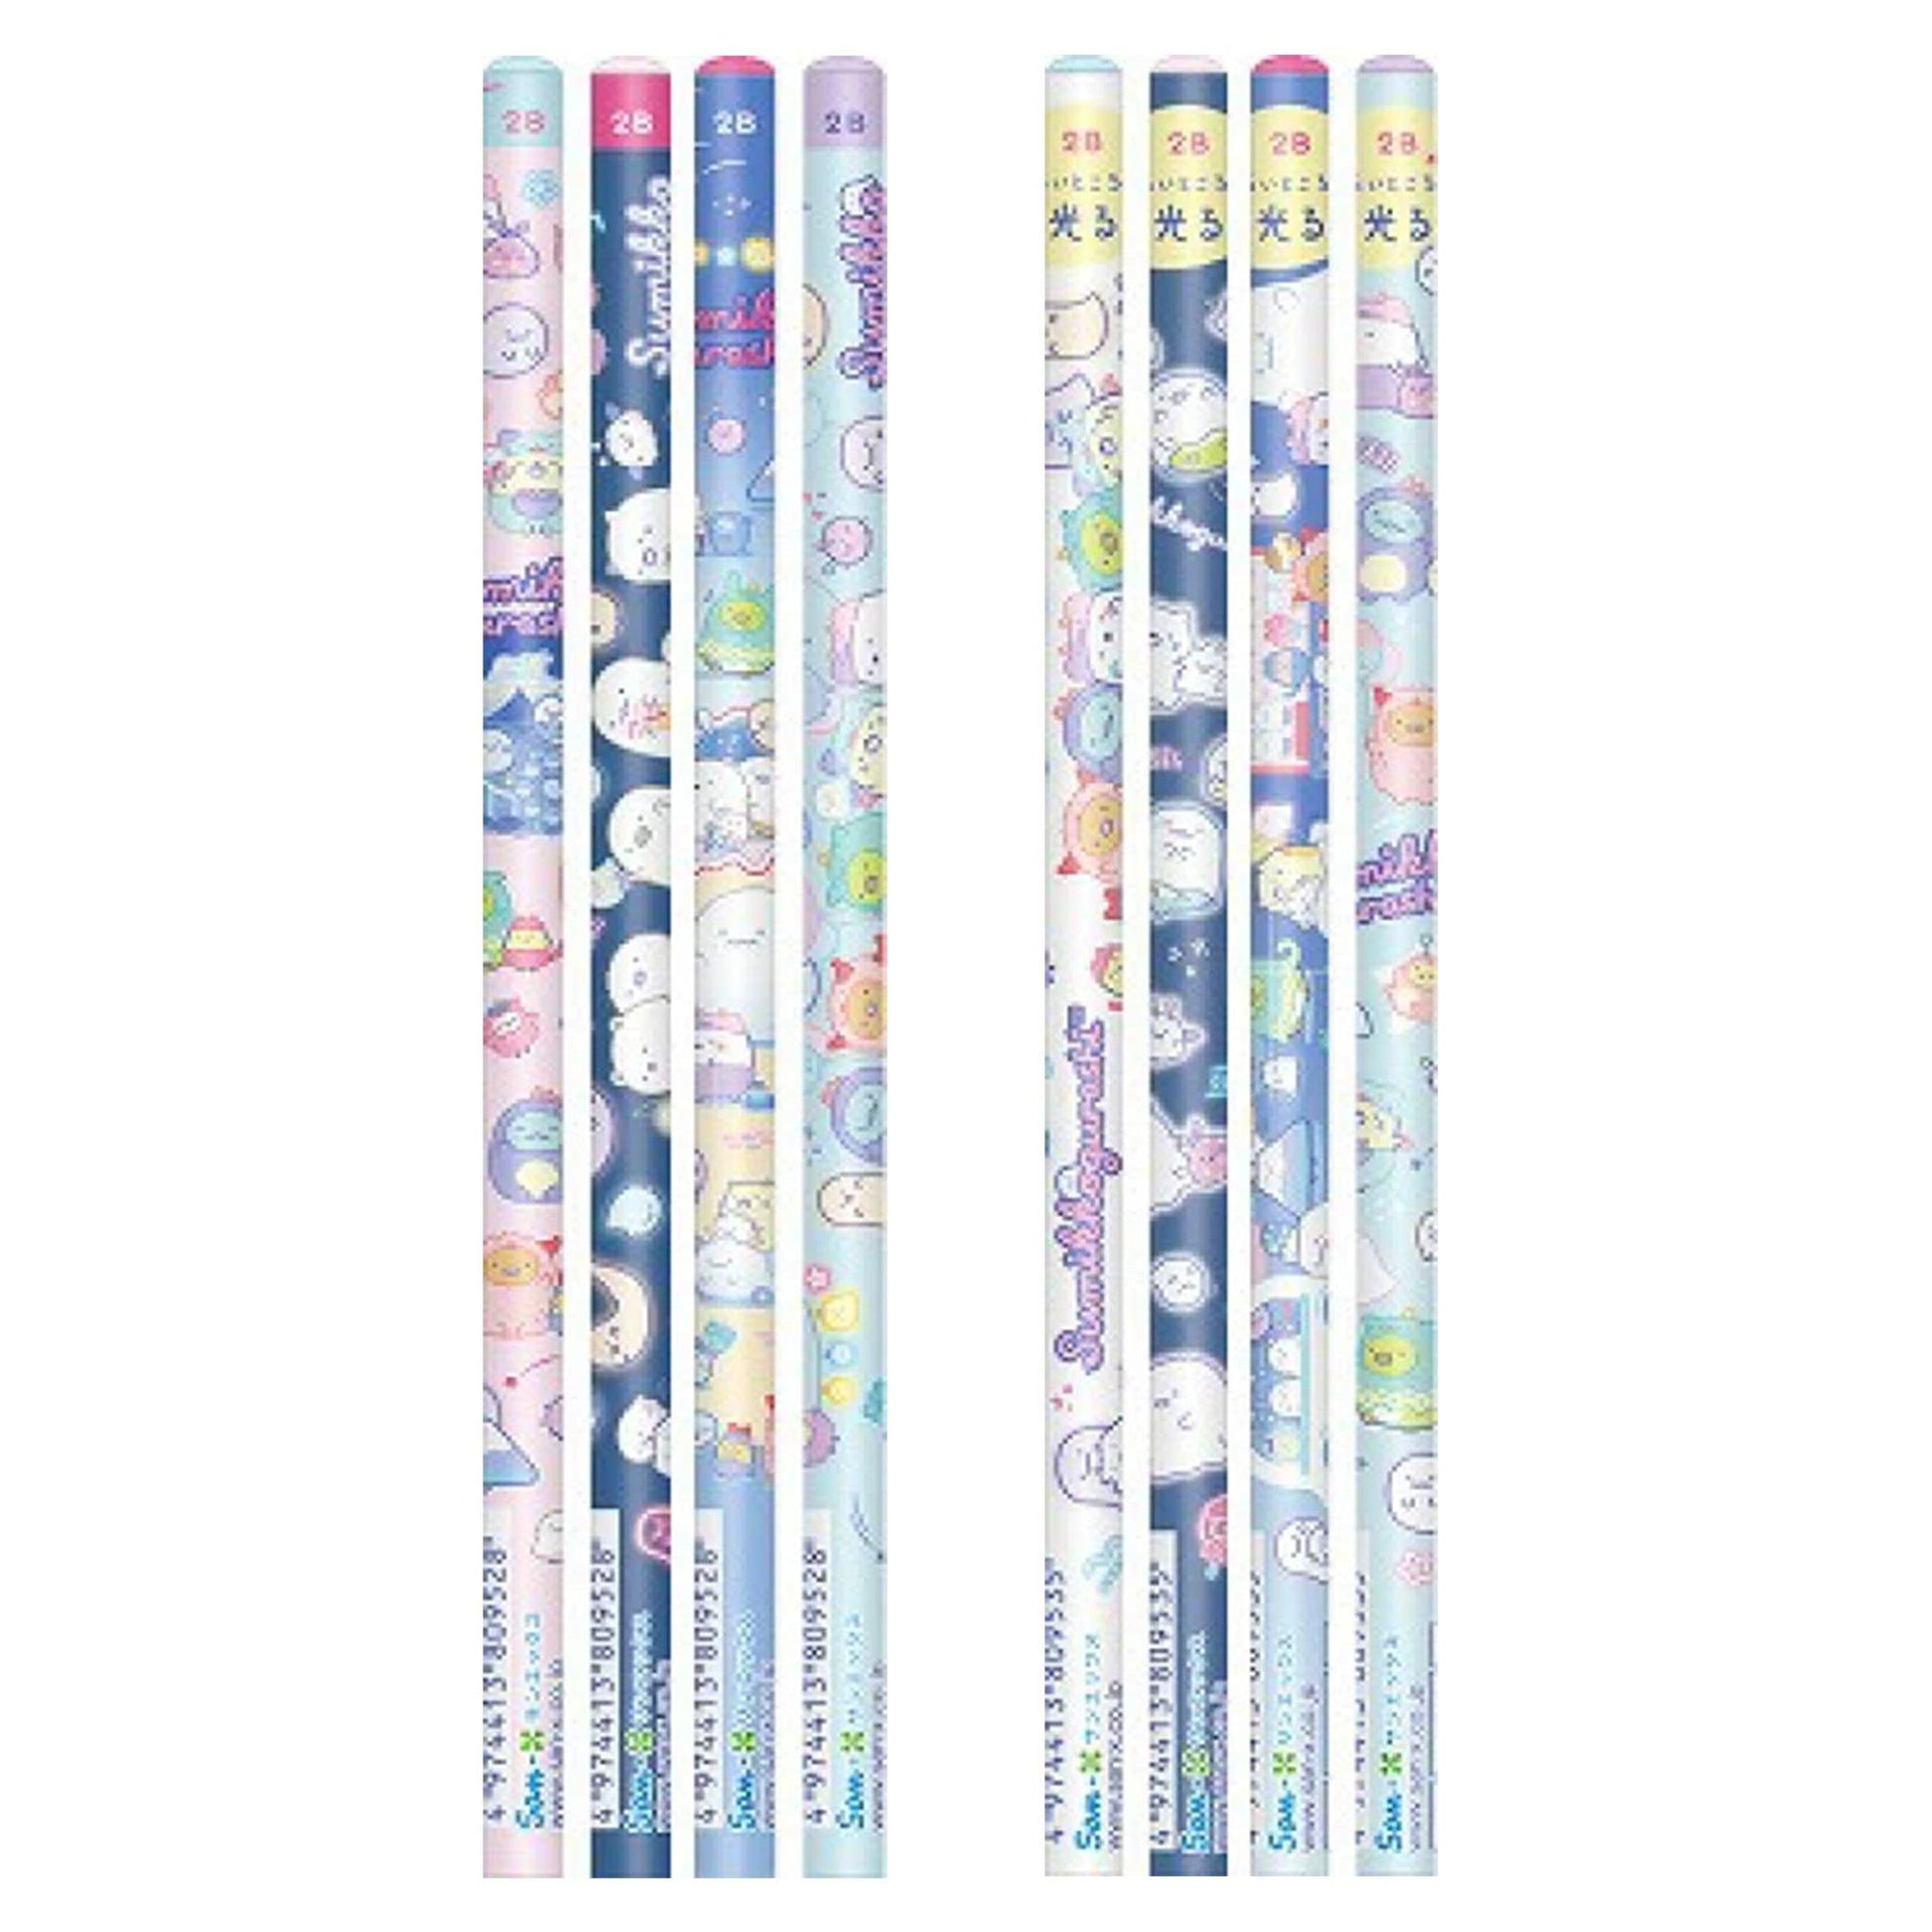 Corner Creature Stationery SAN-X 10th Anniversary Ghost Paradise Series 2B Pencils 4 Sets Pencil Caps 5 Sets Backing Board Cartoon Primary School Students Teenagers Home School Office PH11401 ST91101 - CHL-STORE 